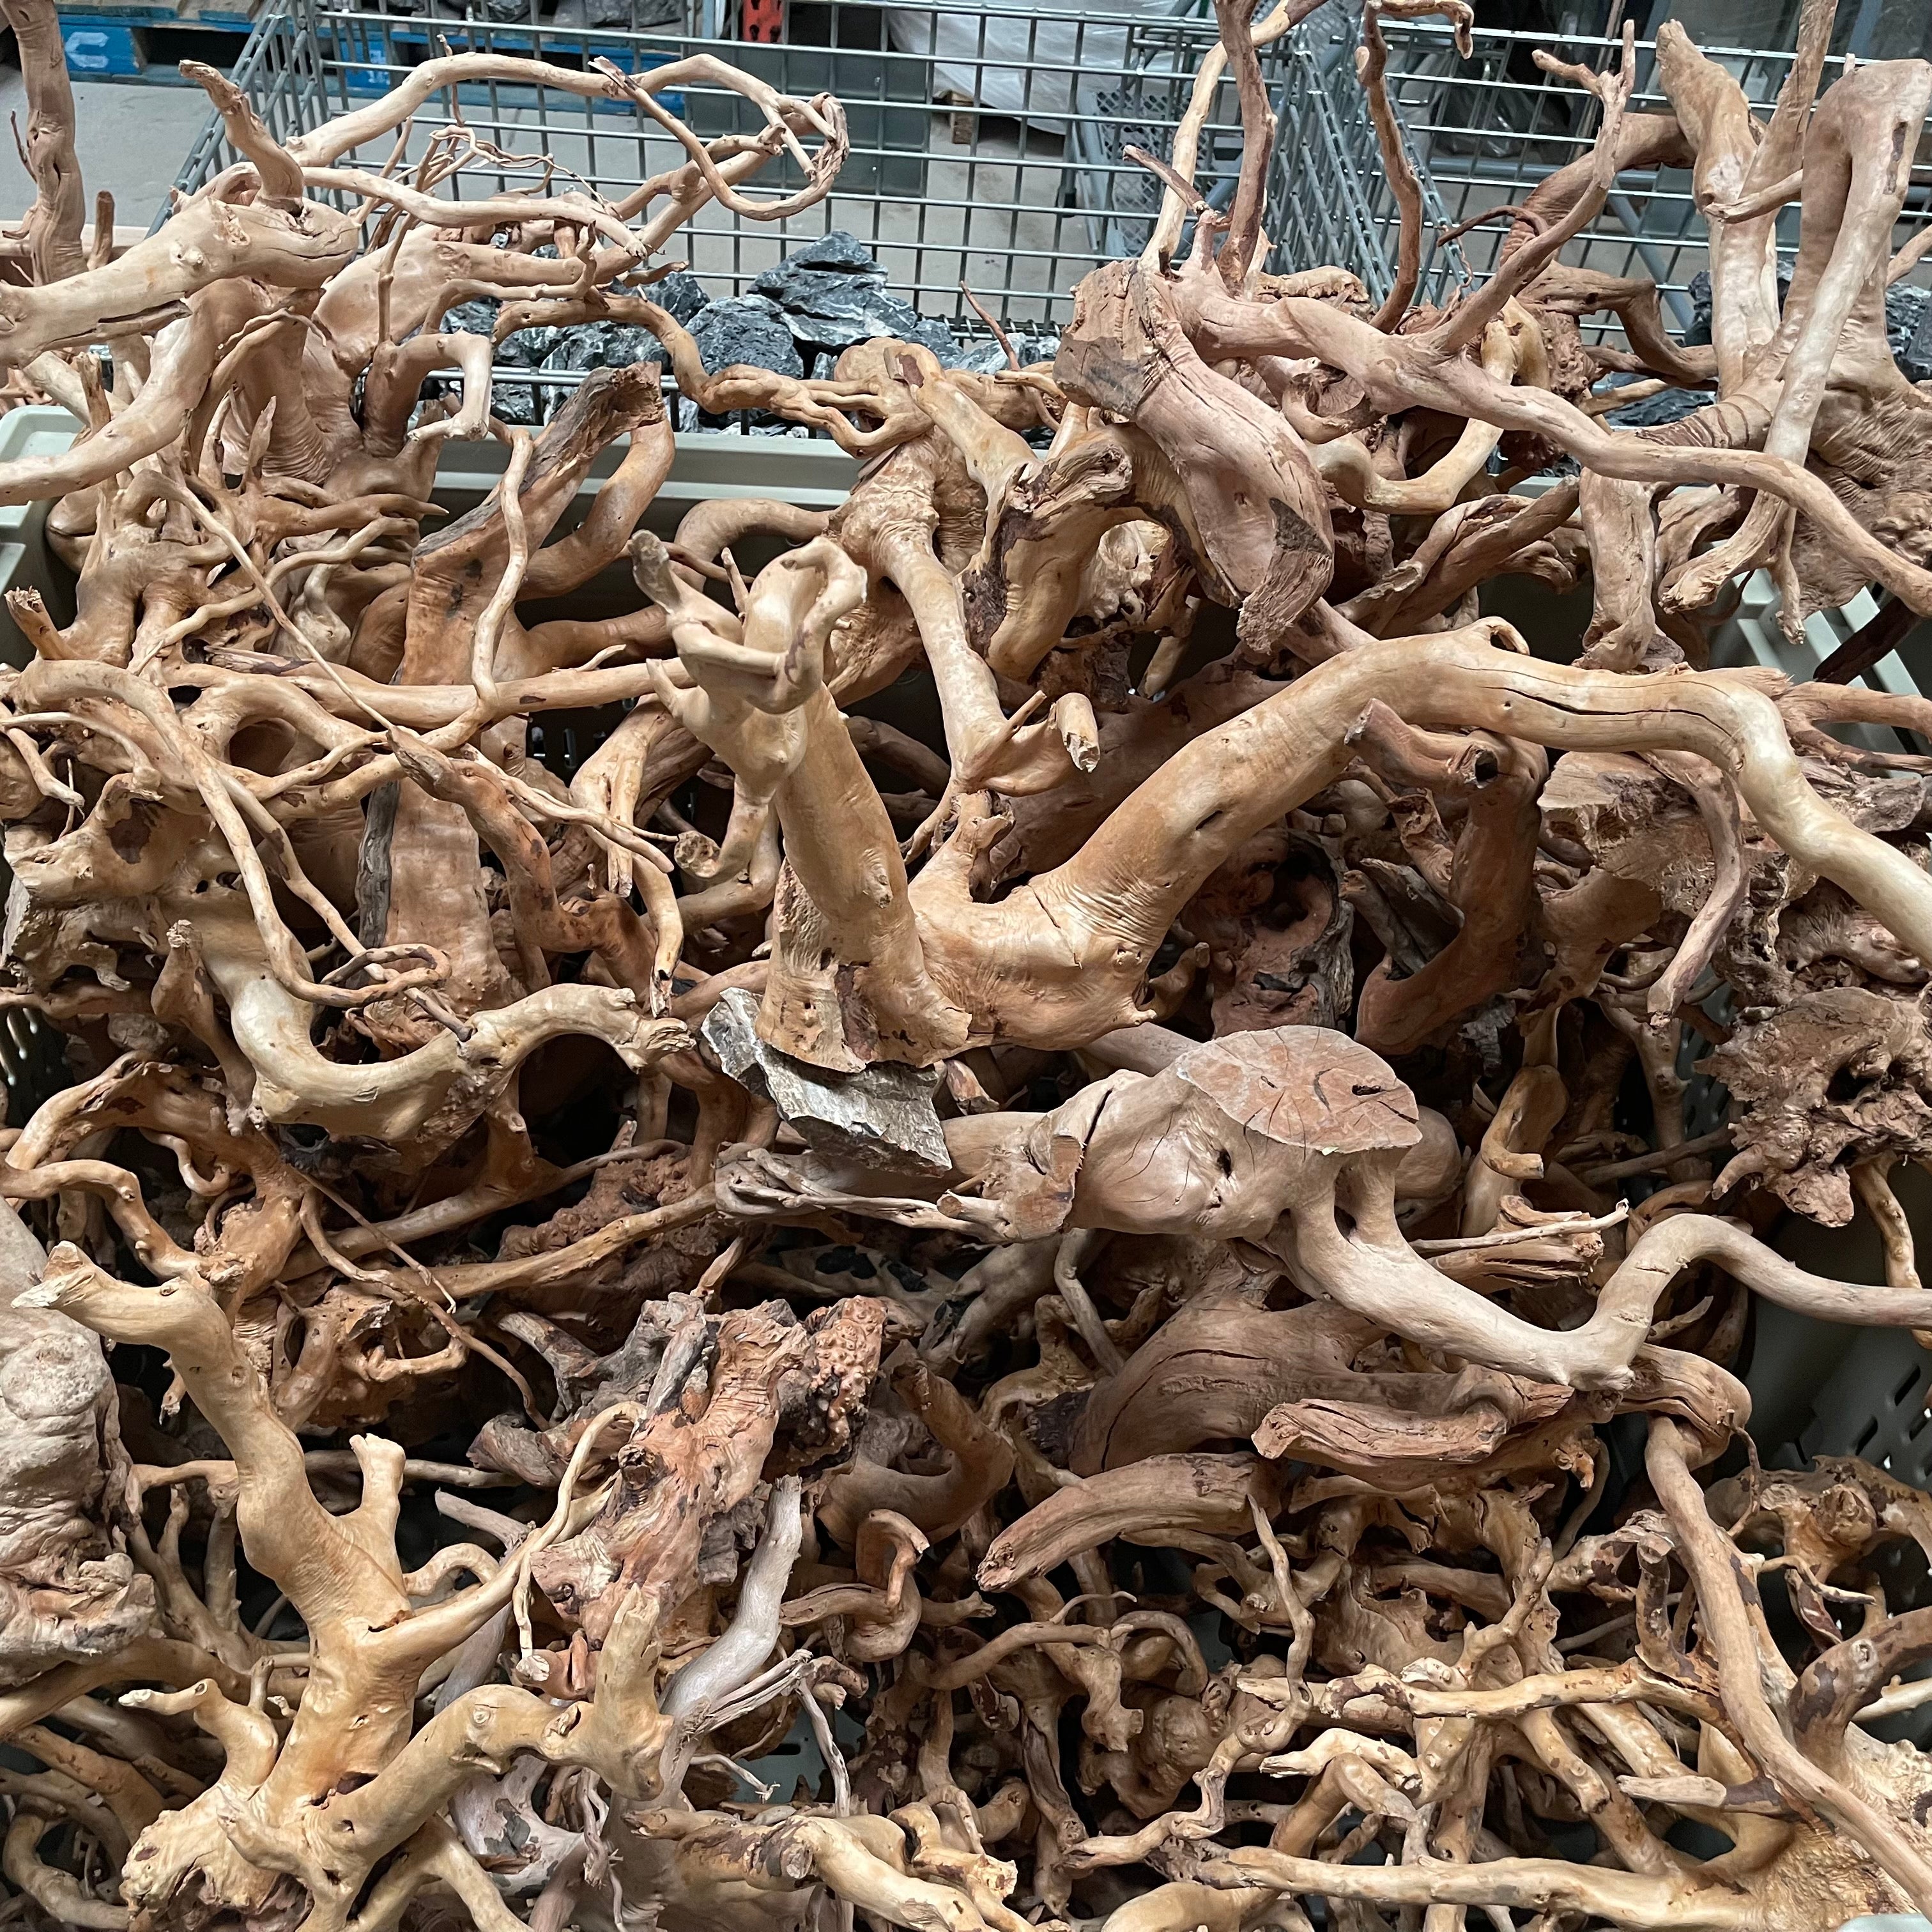 Spider Wood / Cuckoo Root (12-23 Inches) - Bulk Reef Supply